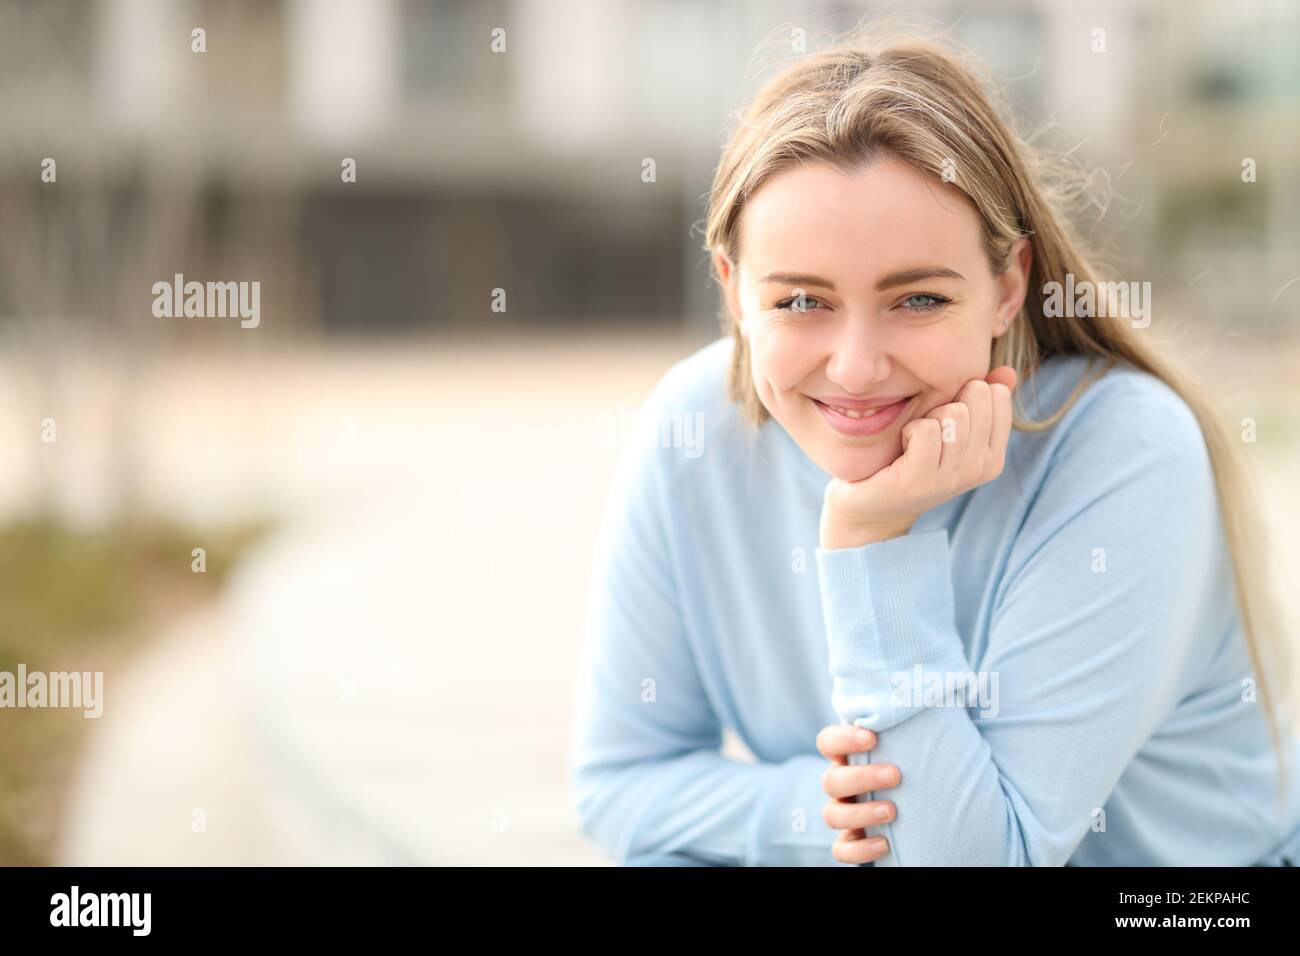 Front view portrait of a happy teen looking at camera in the street Stock Photo